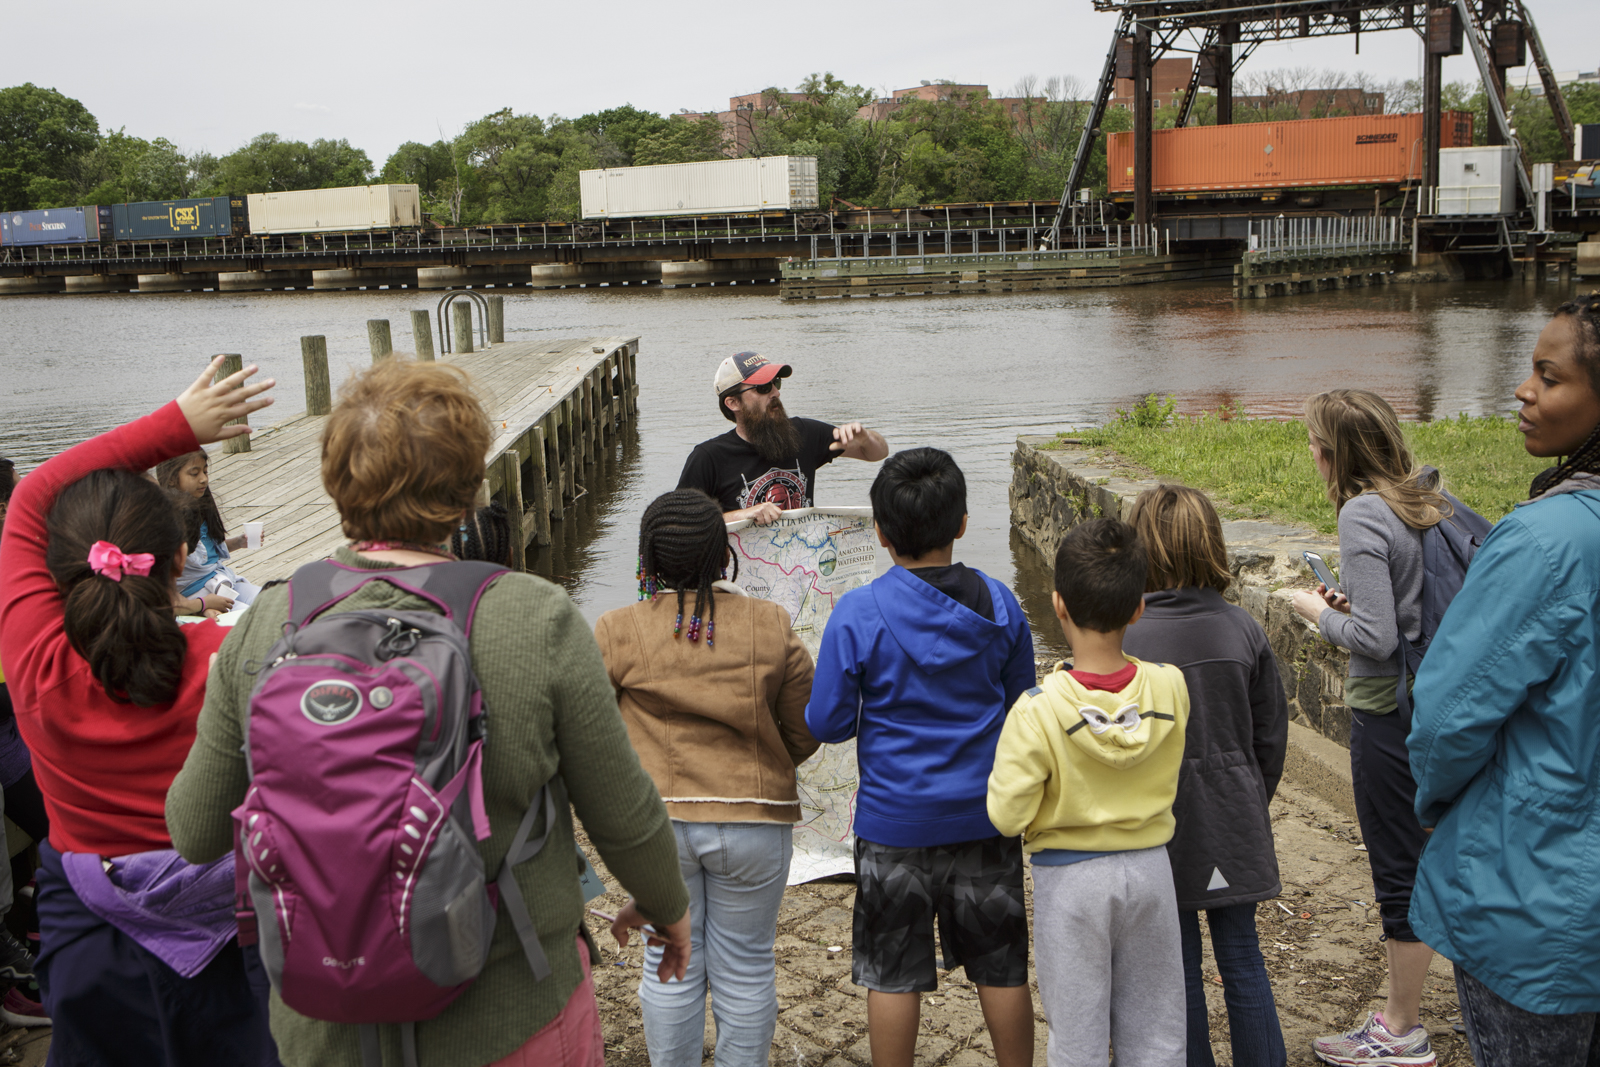  Students from Capitol City Public Charter school take part in a shad release day at the Anacostia River in Washington, D.C. 